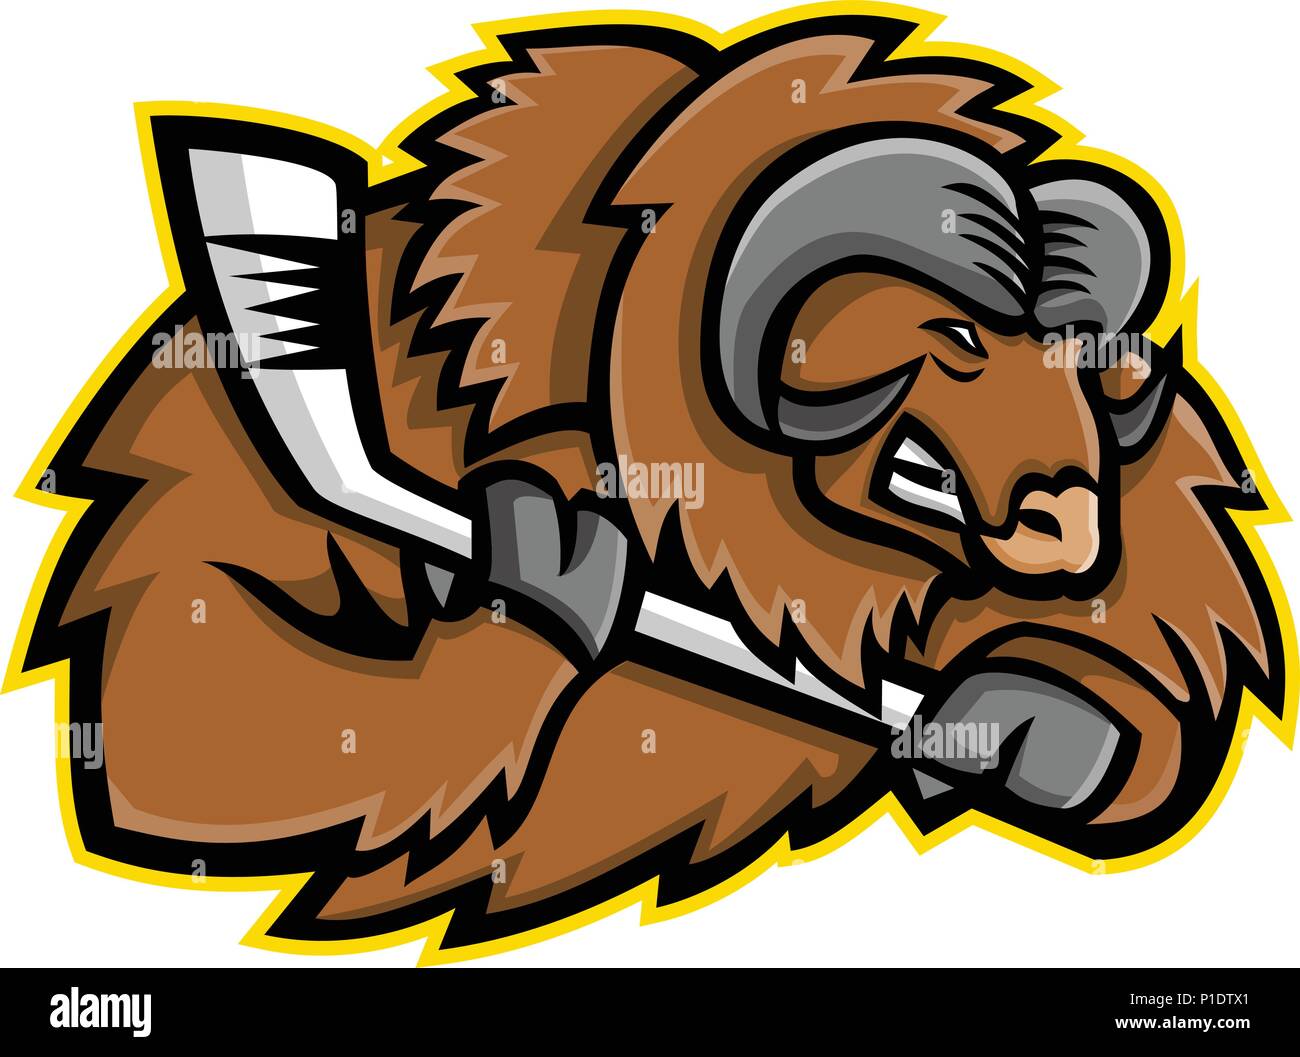 Mascot icon illustration of head of a muskox, musk ox or musk-ox, an Arctic hoofed mammal of the family Bovidae, with ice hockey stick viewed from sid Stock Vector